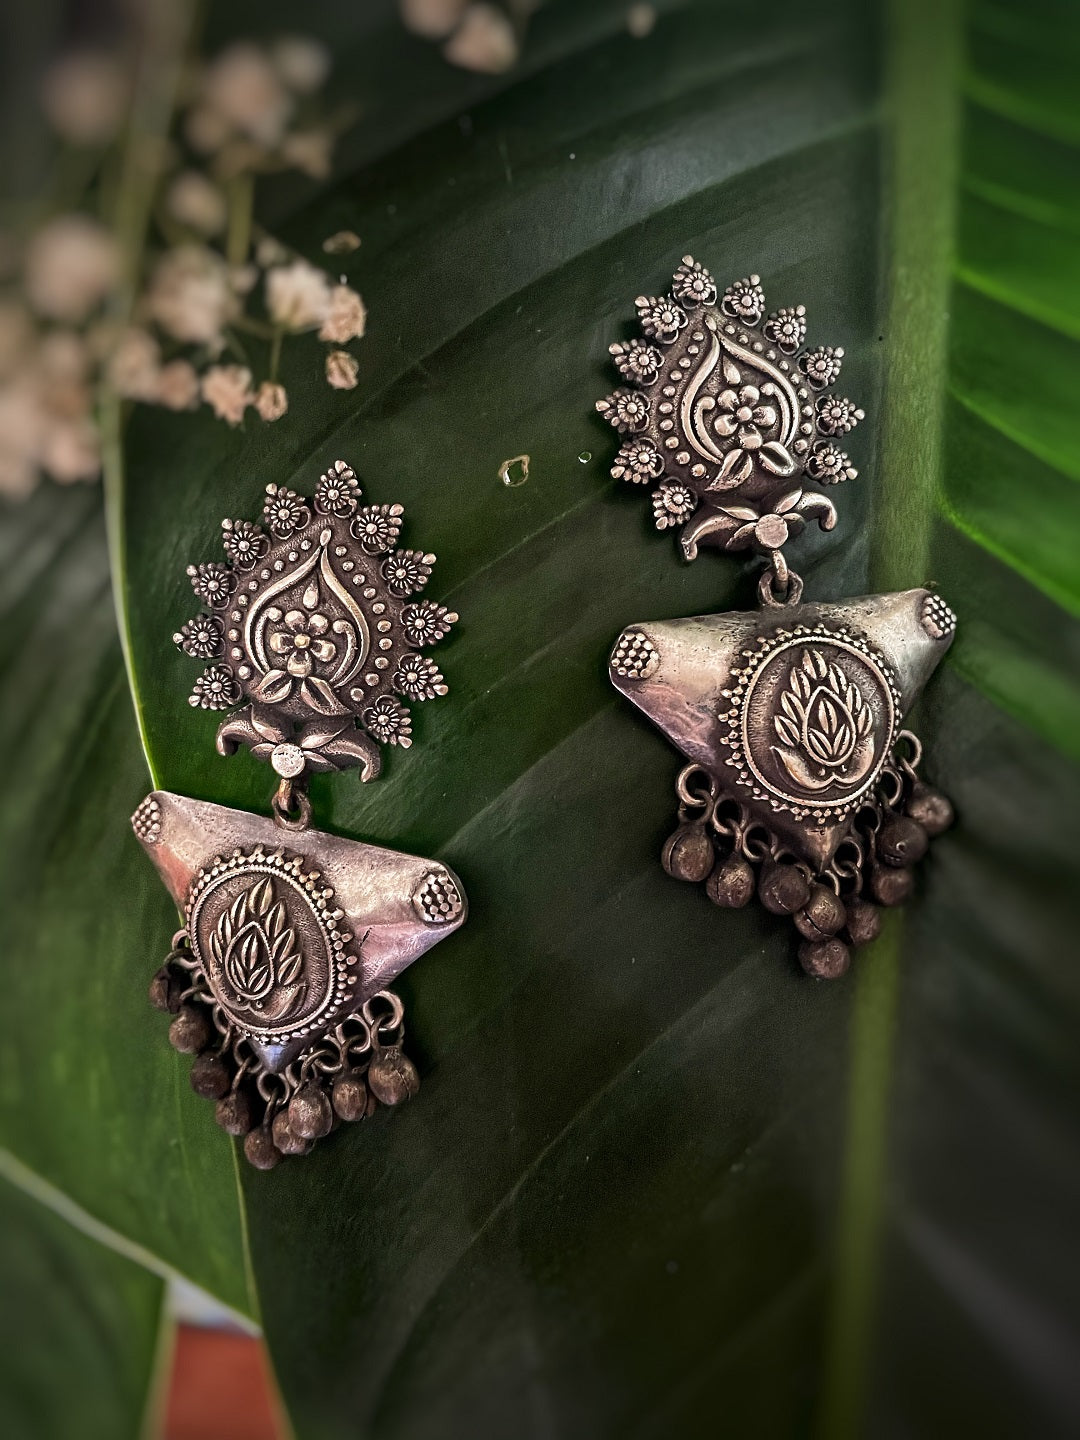 image for German Silver Oxidized Earrings Antique Floral/Leafy Armed Shield Design Engraved Gungroo Danglers